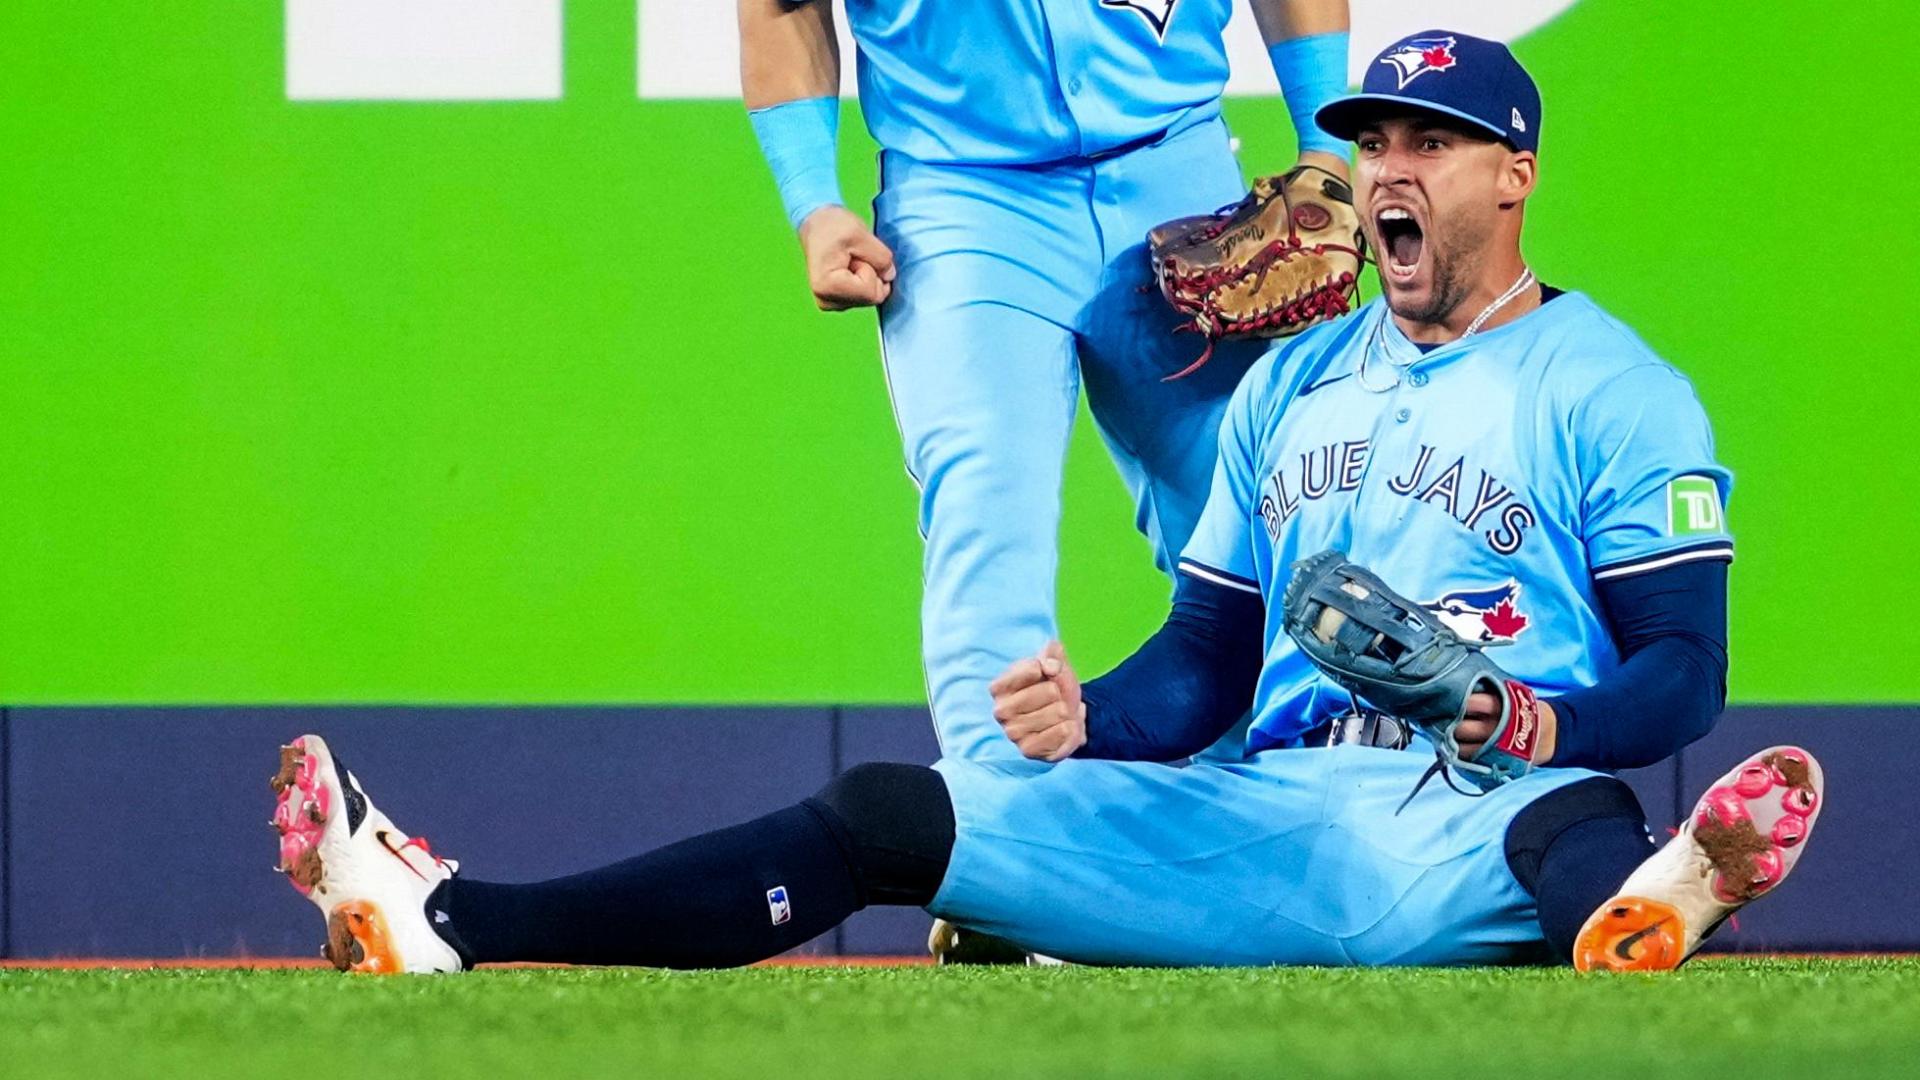 George Springer is beyond fired up after catch-of-the-year candidate